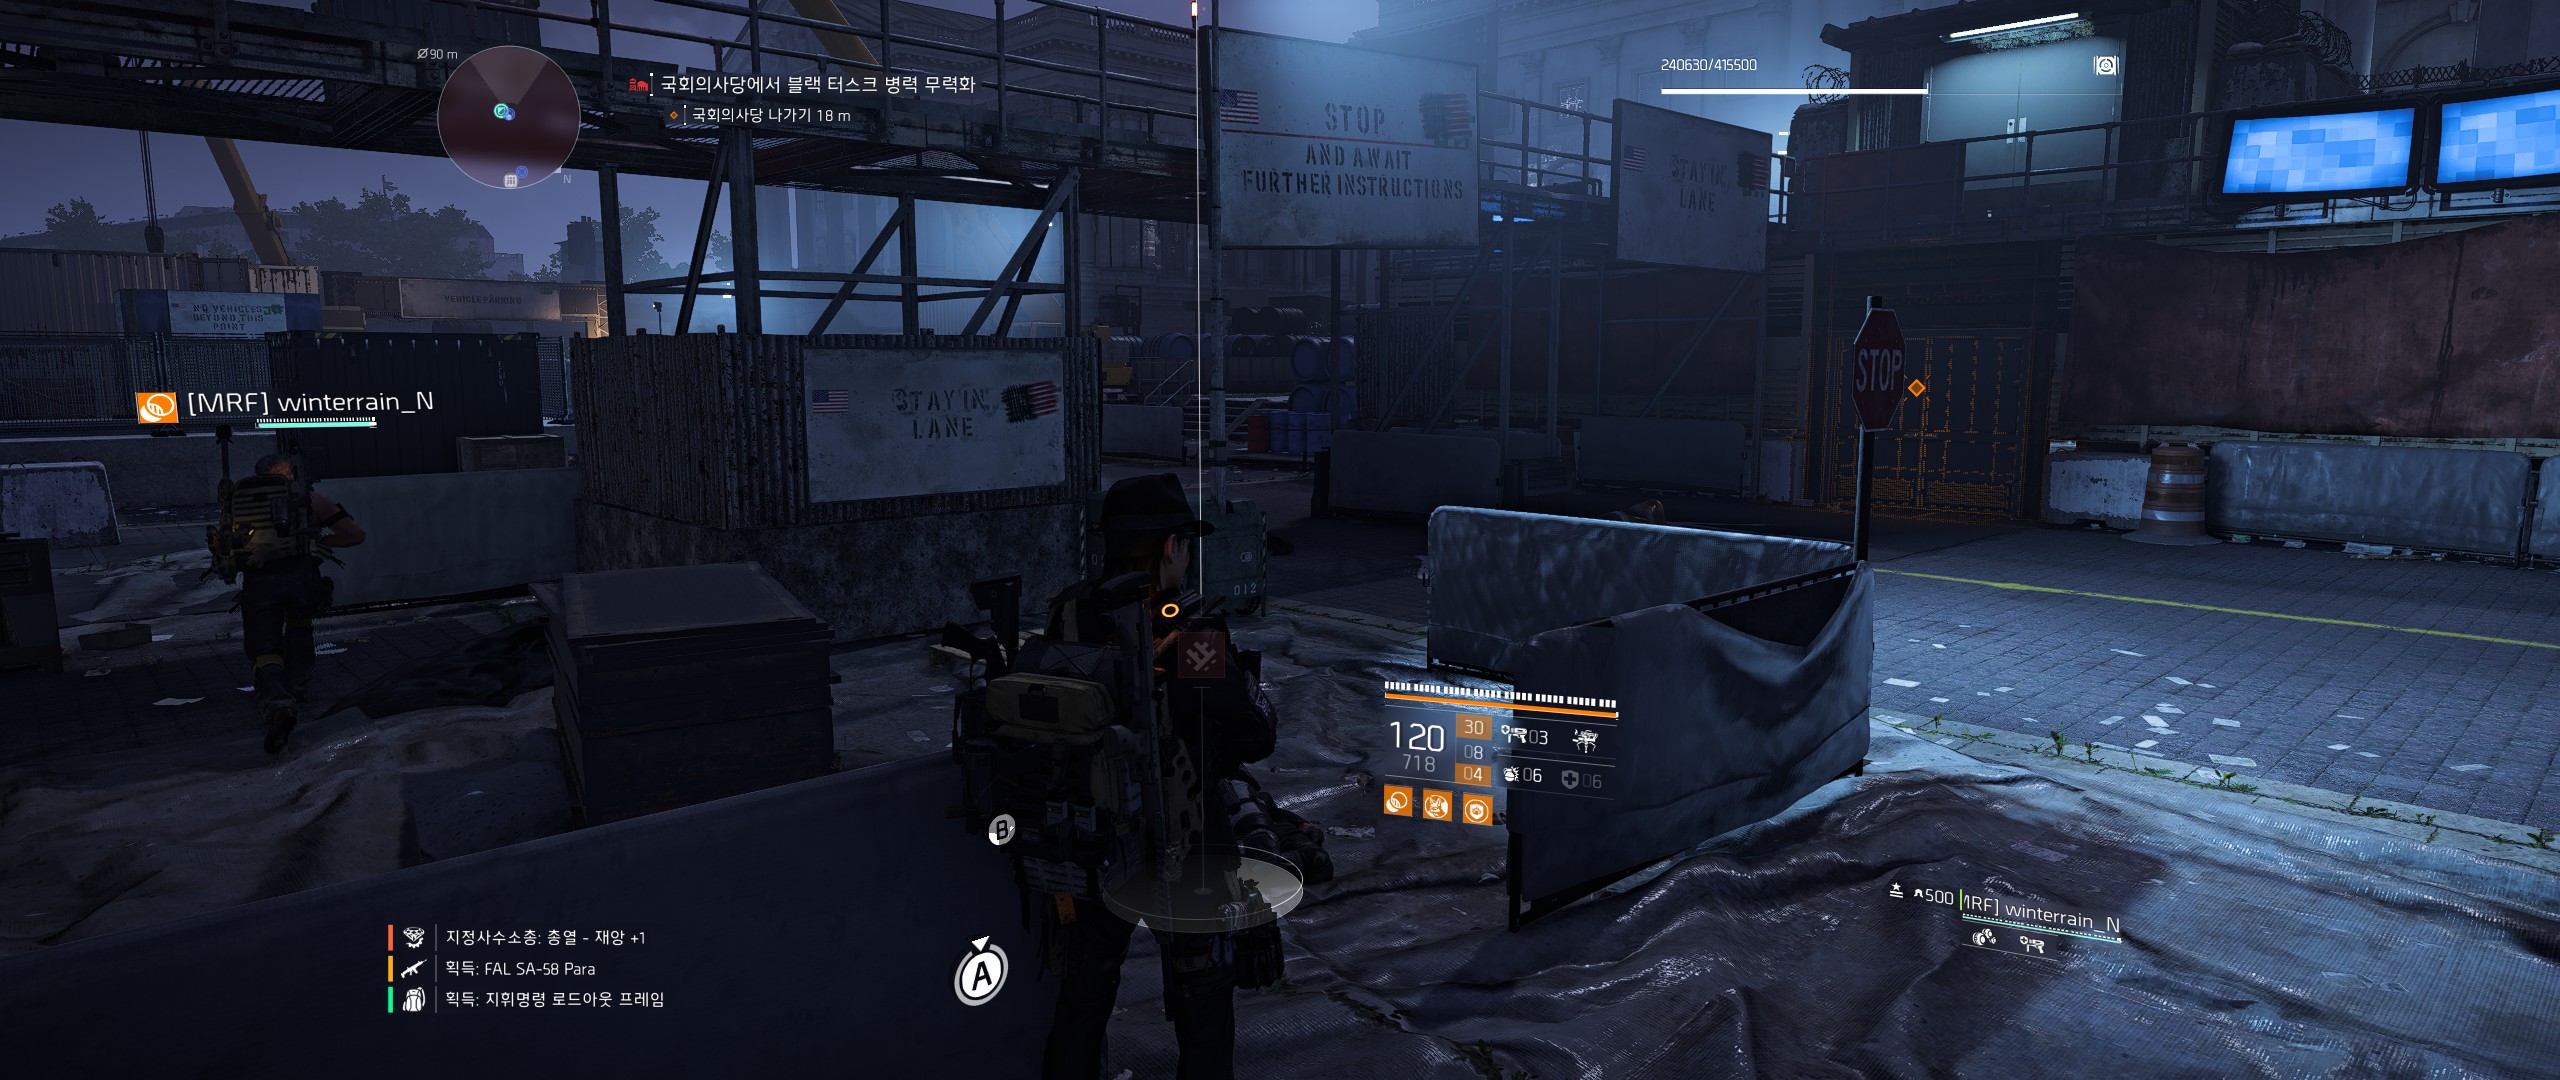 Tom Clancy's The Division® 22019-4-7-23-32-59.jpg